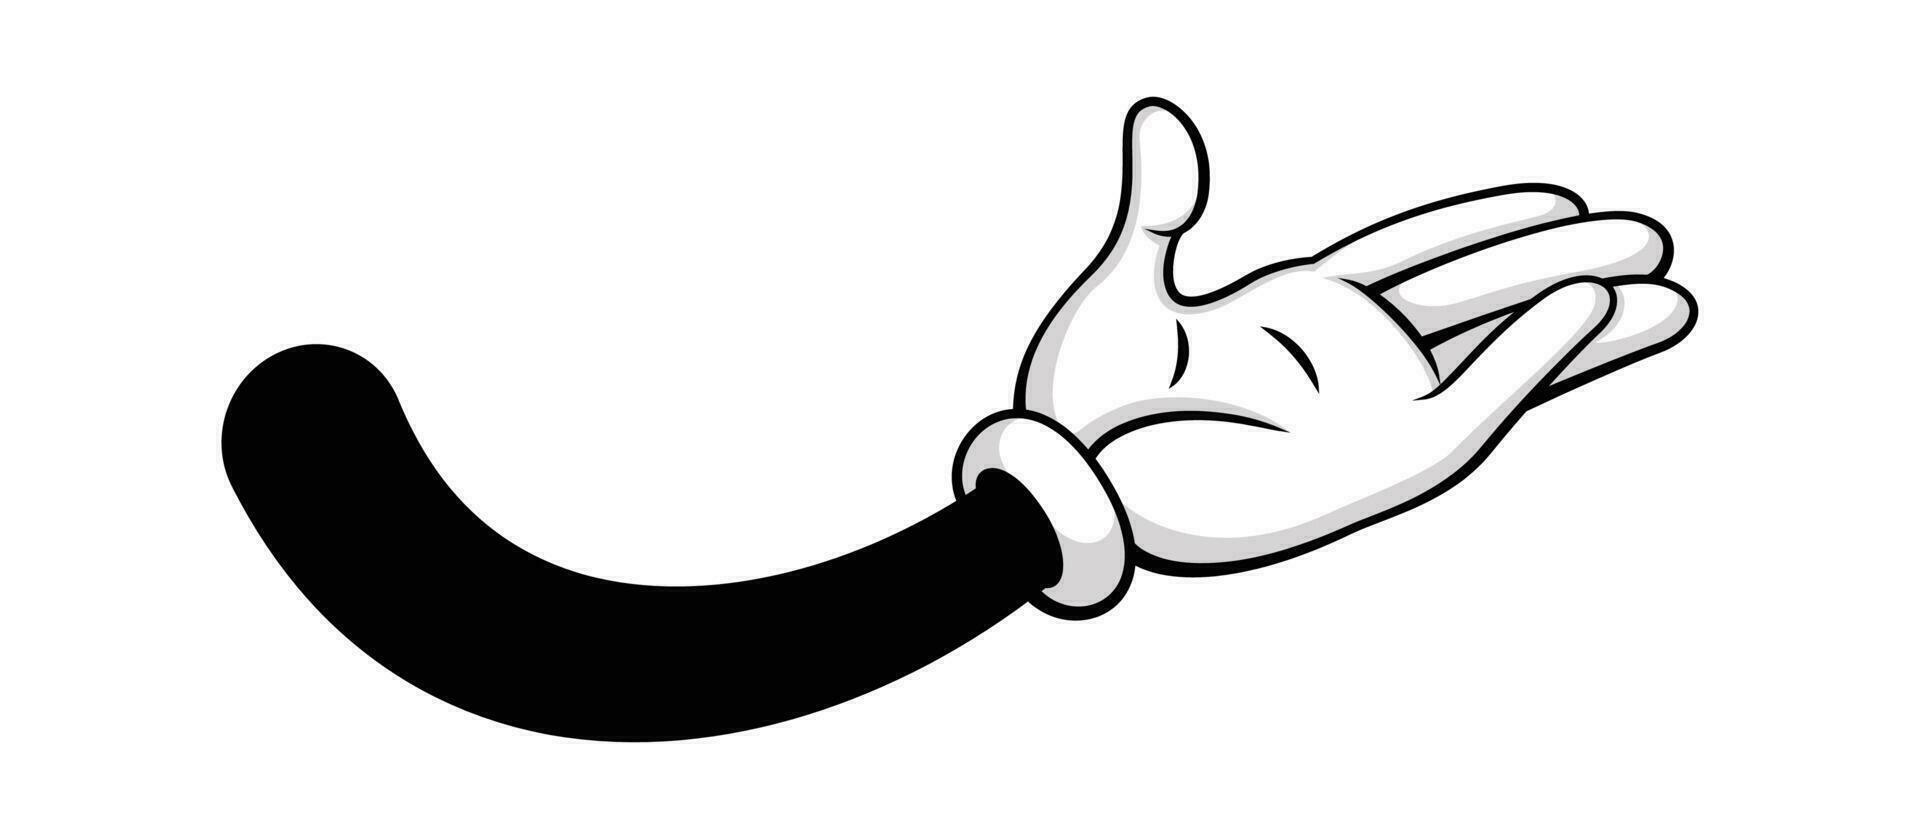 Comic cartoon hand with open palm in white gloves vector